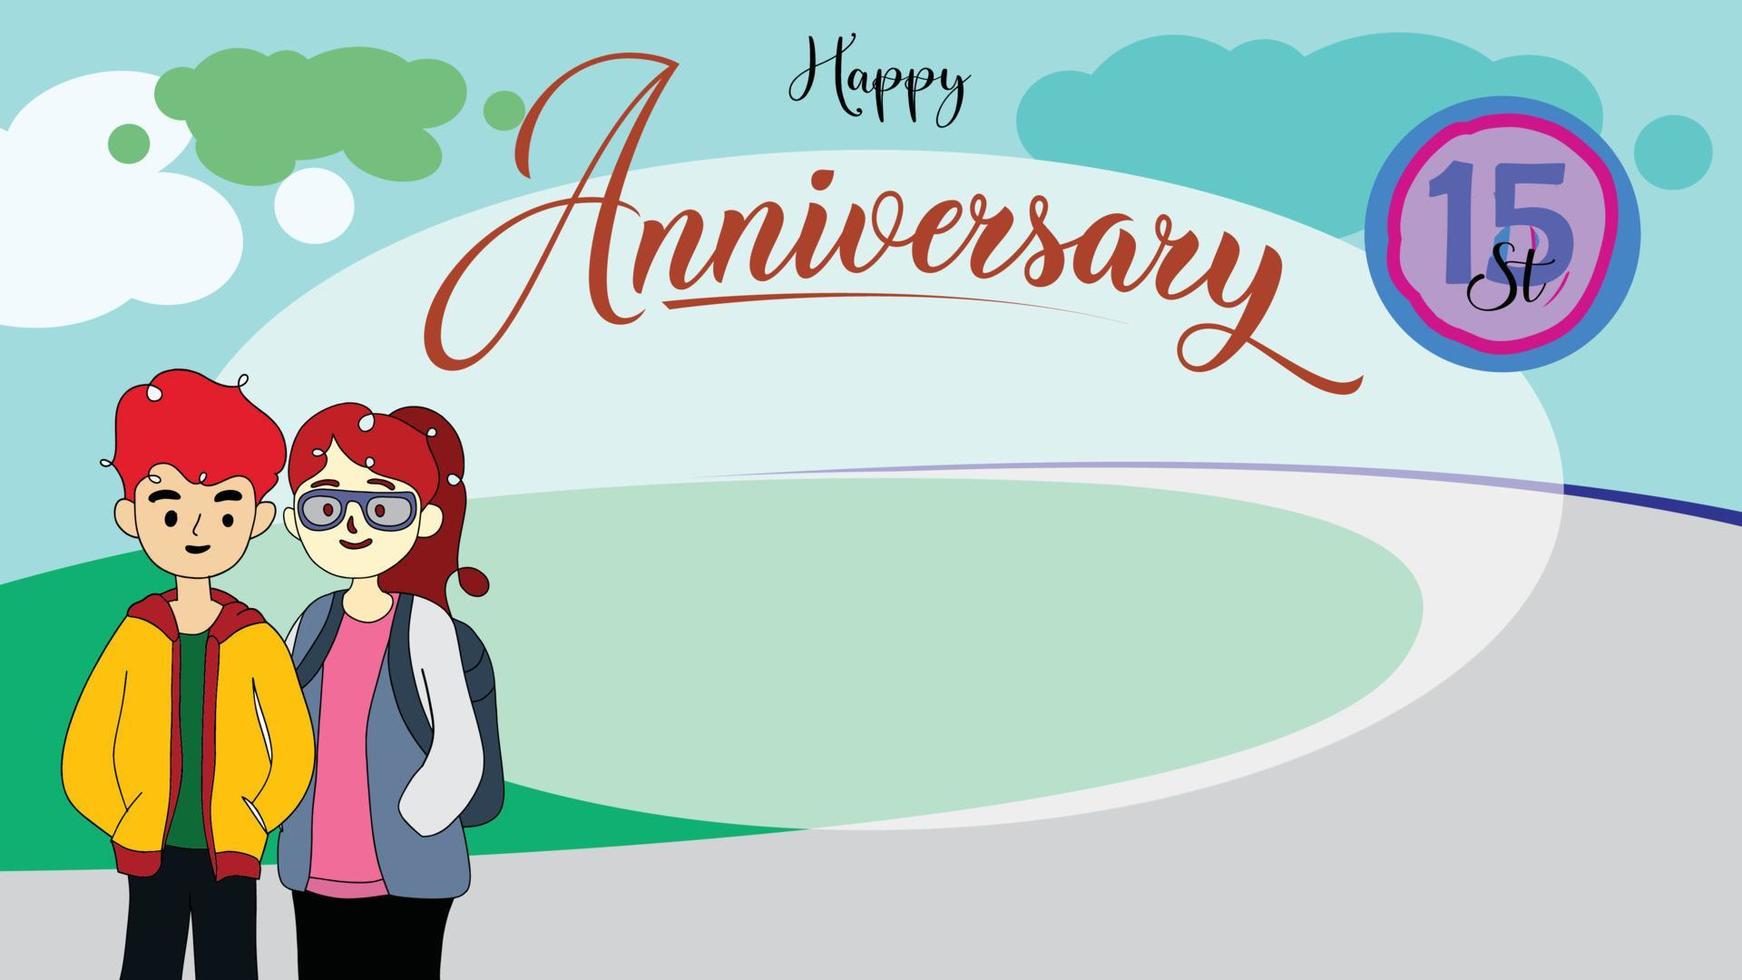 Anniversary greeting cards. Green background. Couple cartoon character. vector